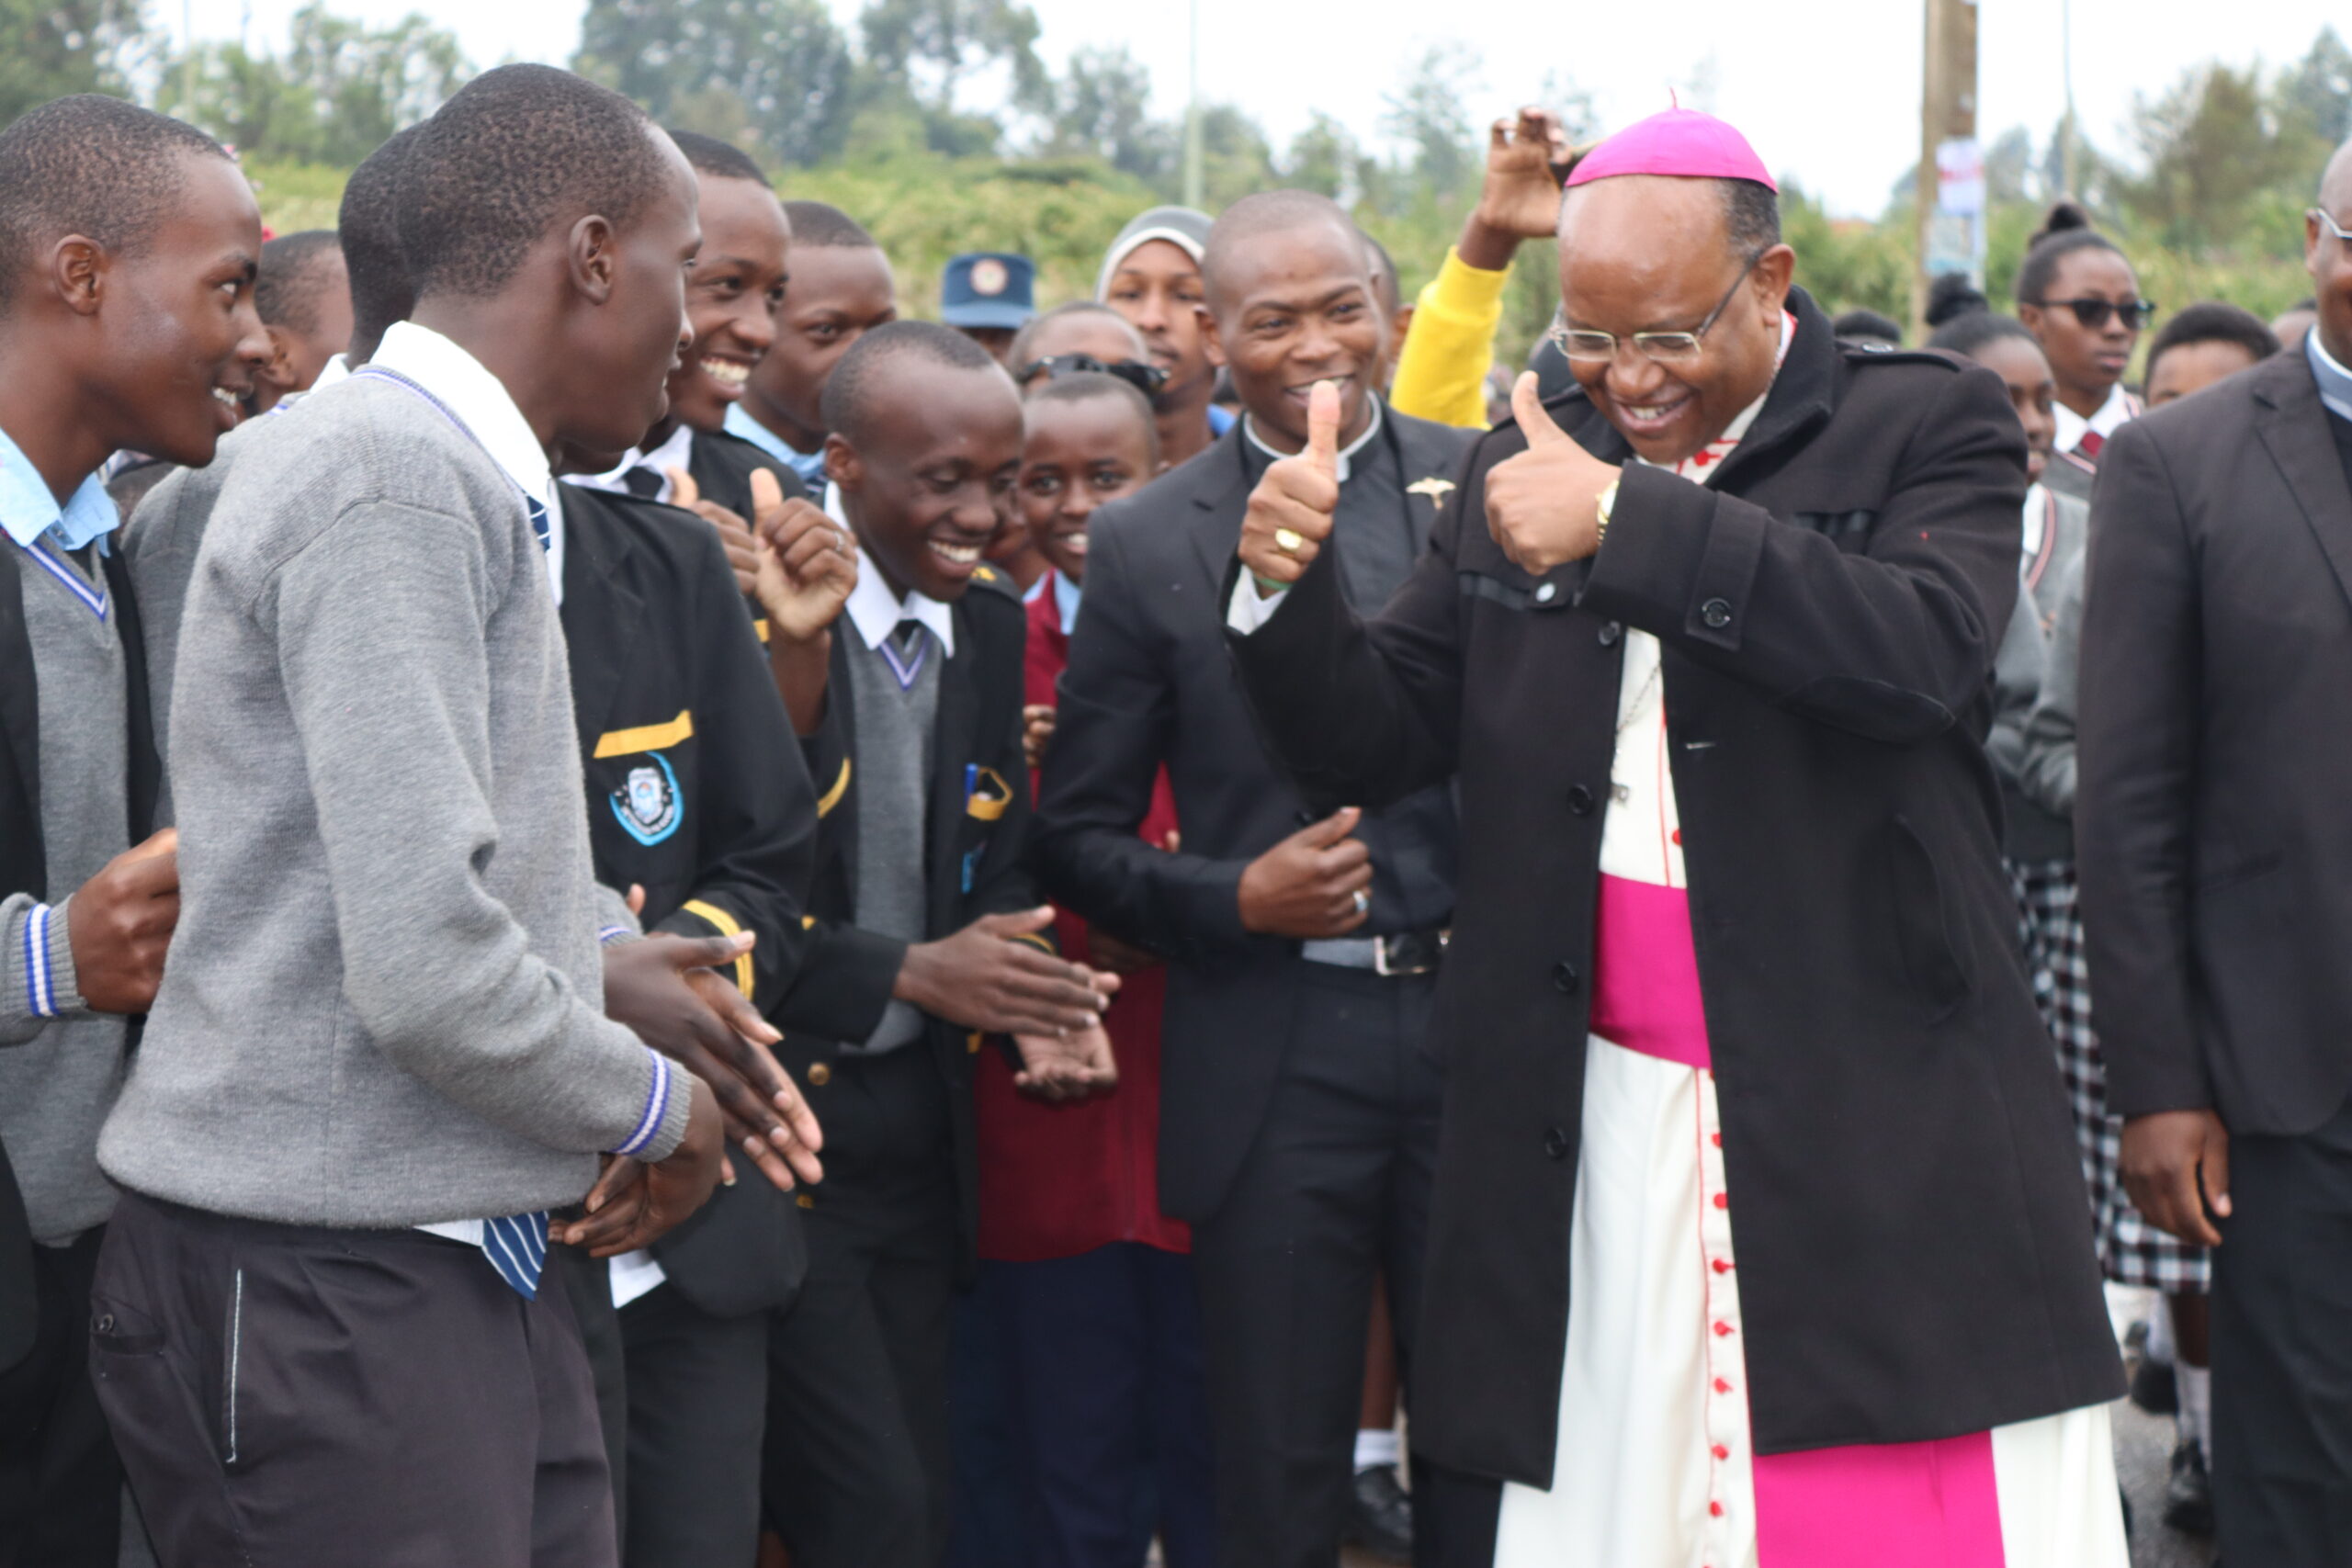 ARCHBISHOP INTERACTING WITH YOUTHS AT NANYUKI DEANERY